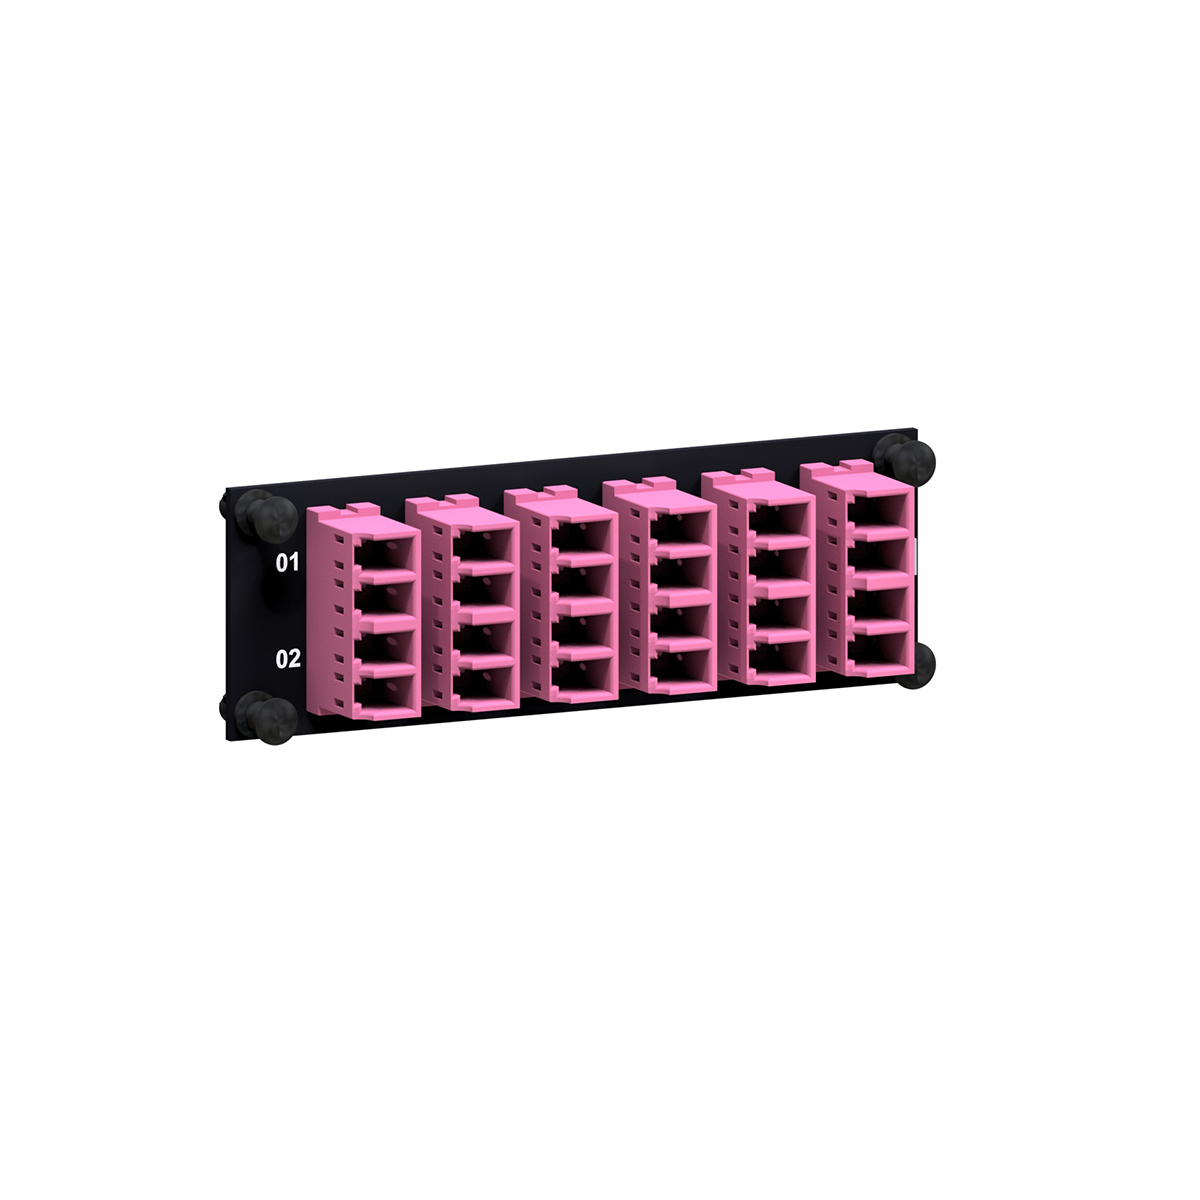 SMAP-G2 SD 1 HU 1/4 part front plate with LC-Duplex multimode OM4 violett, orientation conventional